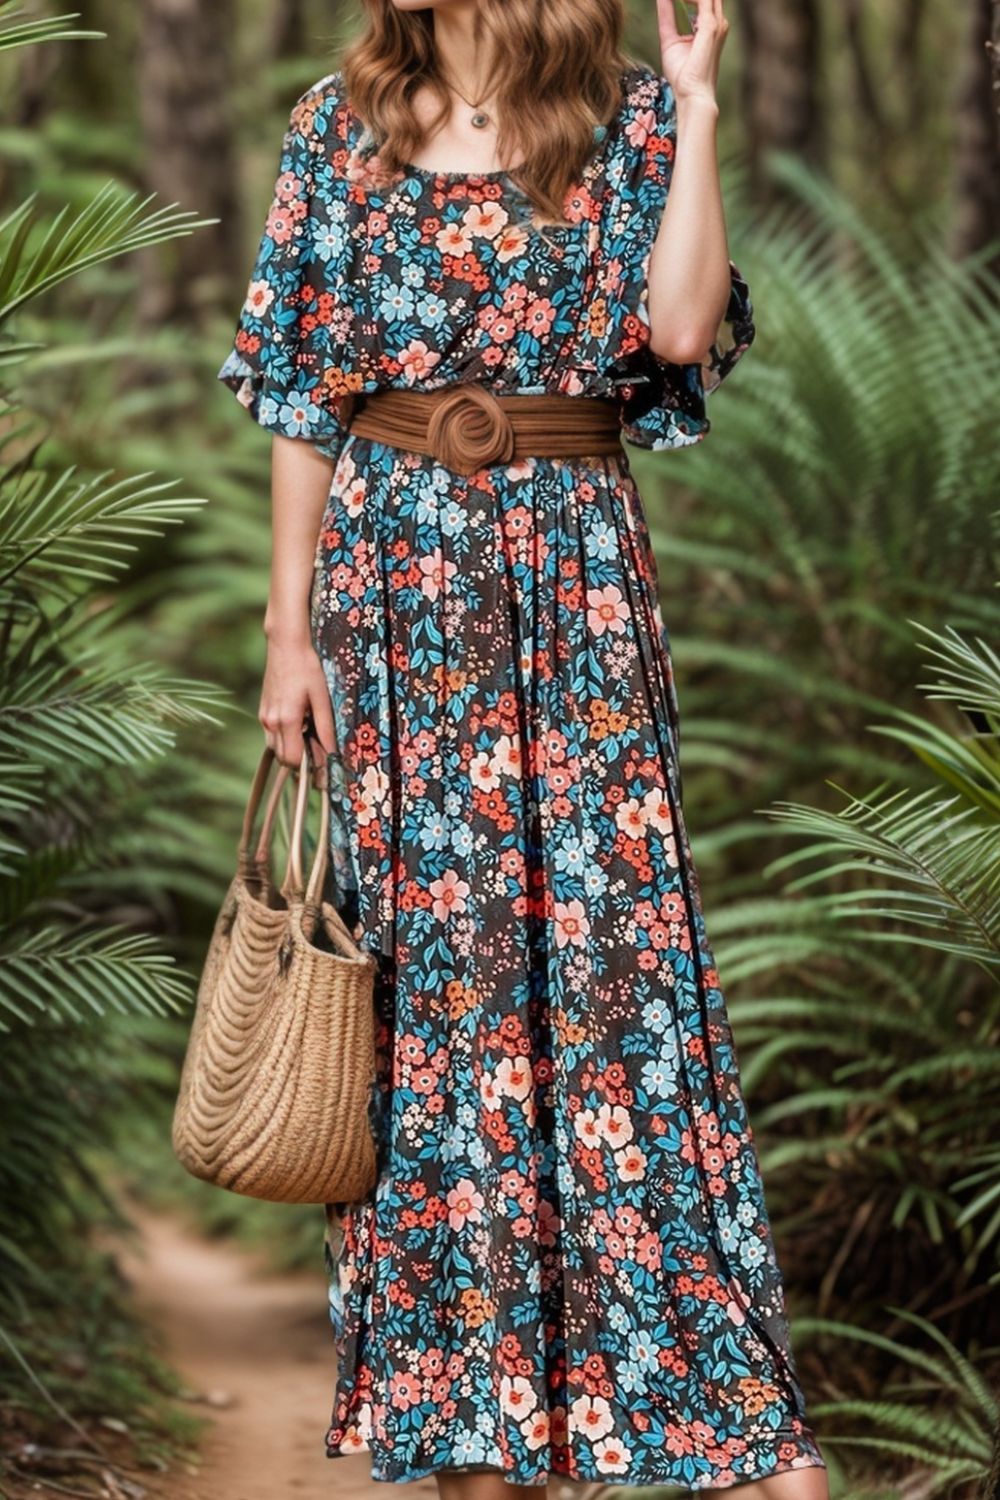 Explore More Collection - Tied Printed Round Neck Half Sleeve Dress